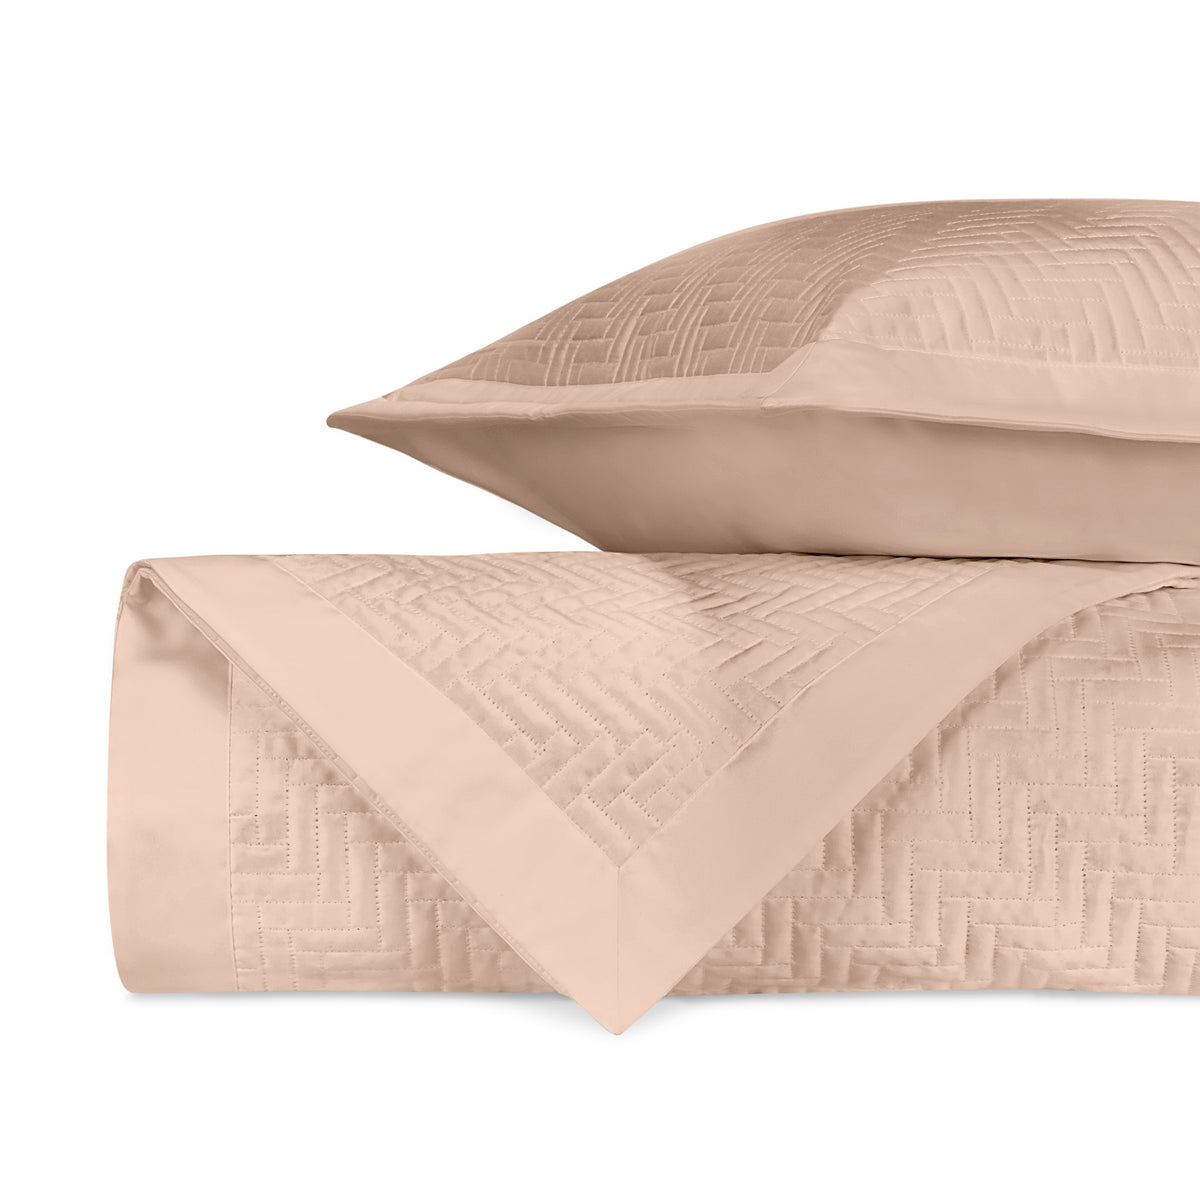 Stack Image of Home Treasures Baxter Royal Sateen Quilted Bedding in Color Blush